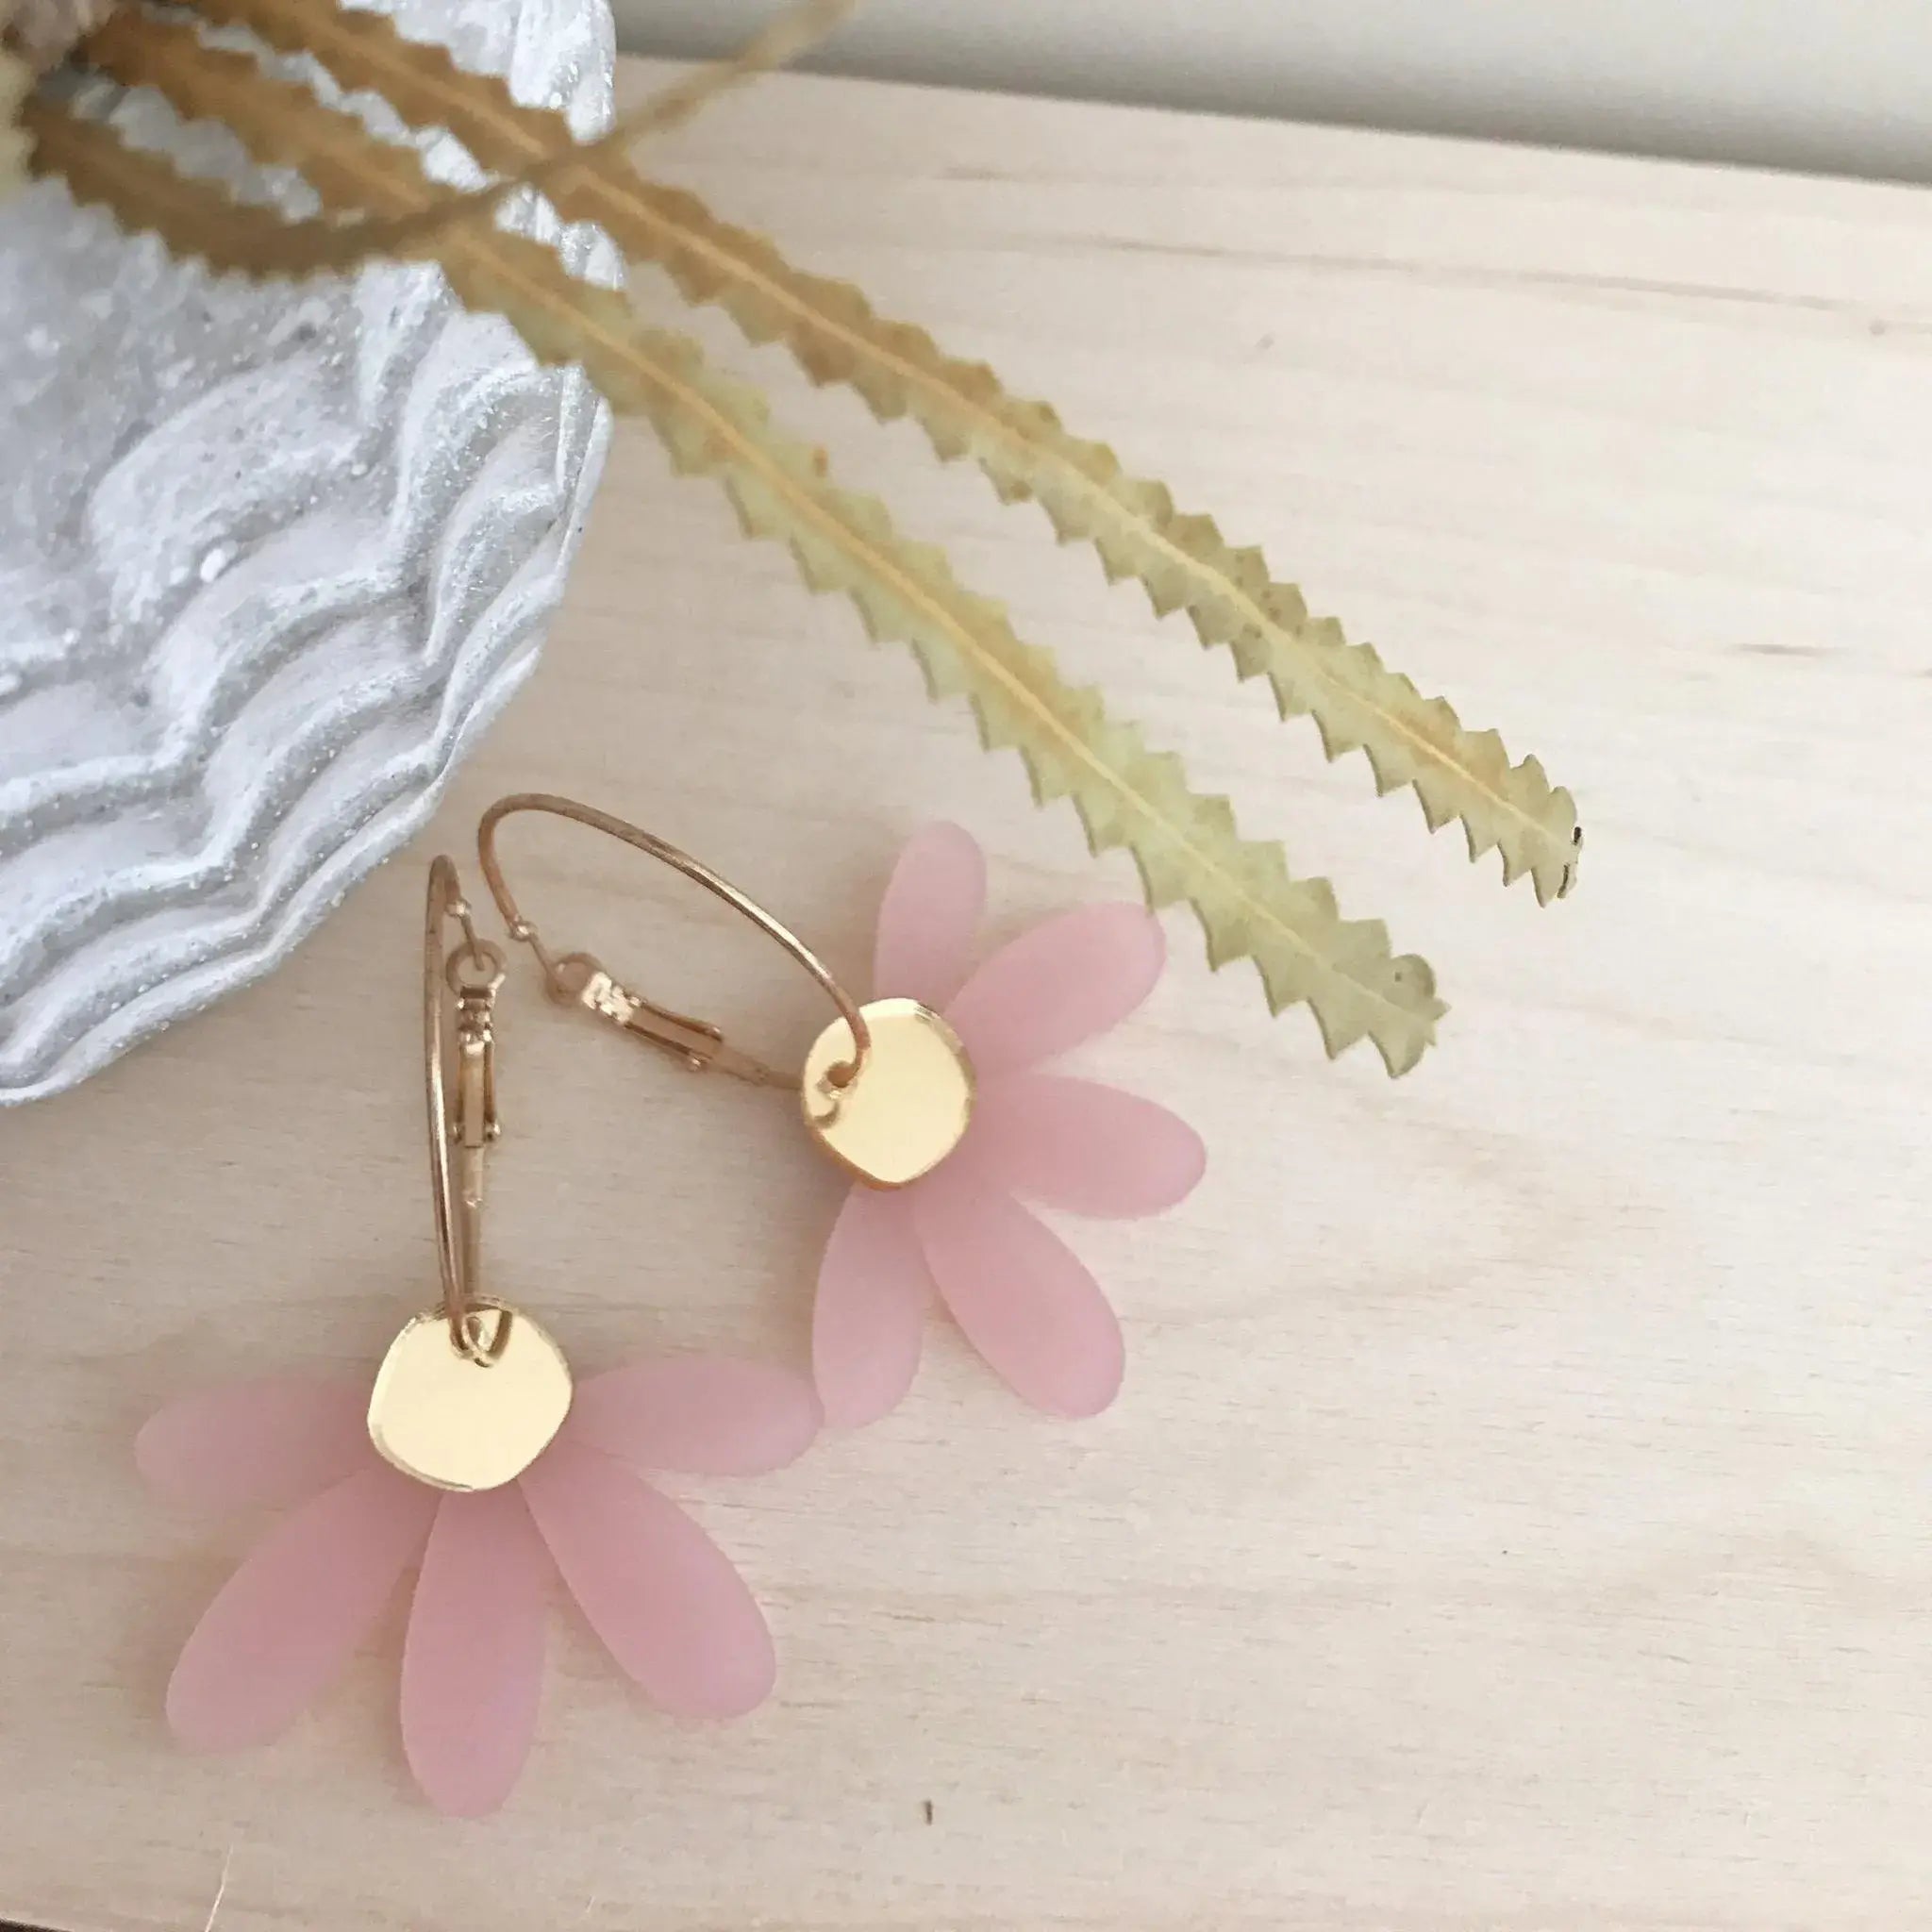 Jumbo Daisy Hoop Earrings in Frosted Pink &amp; Gold by Foxie Collective